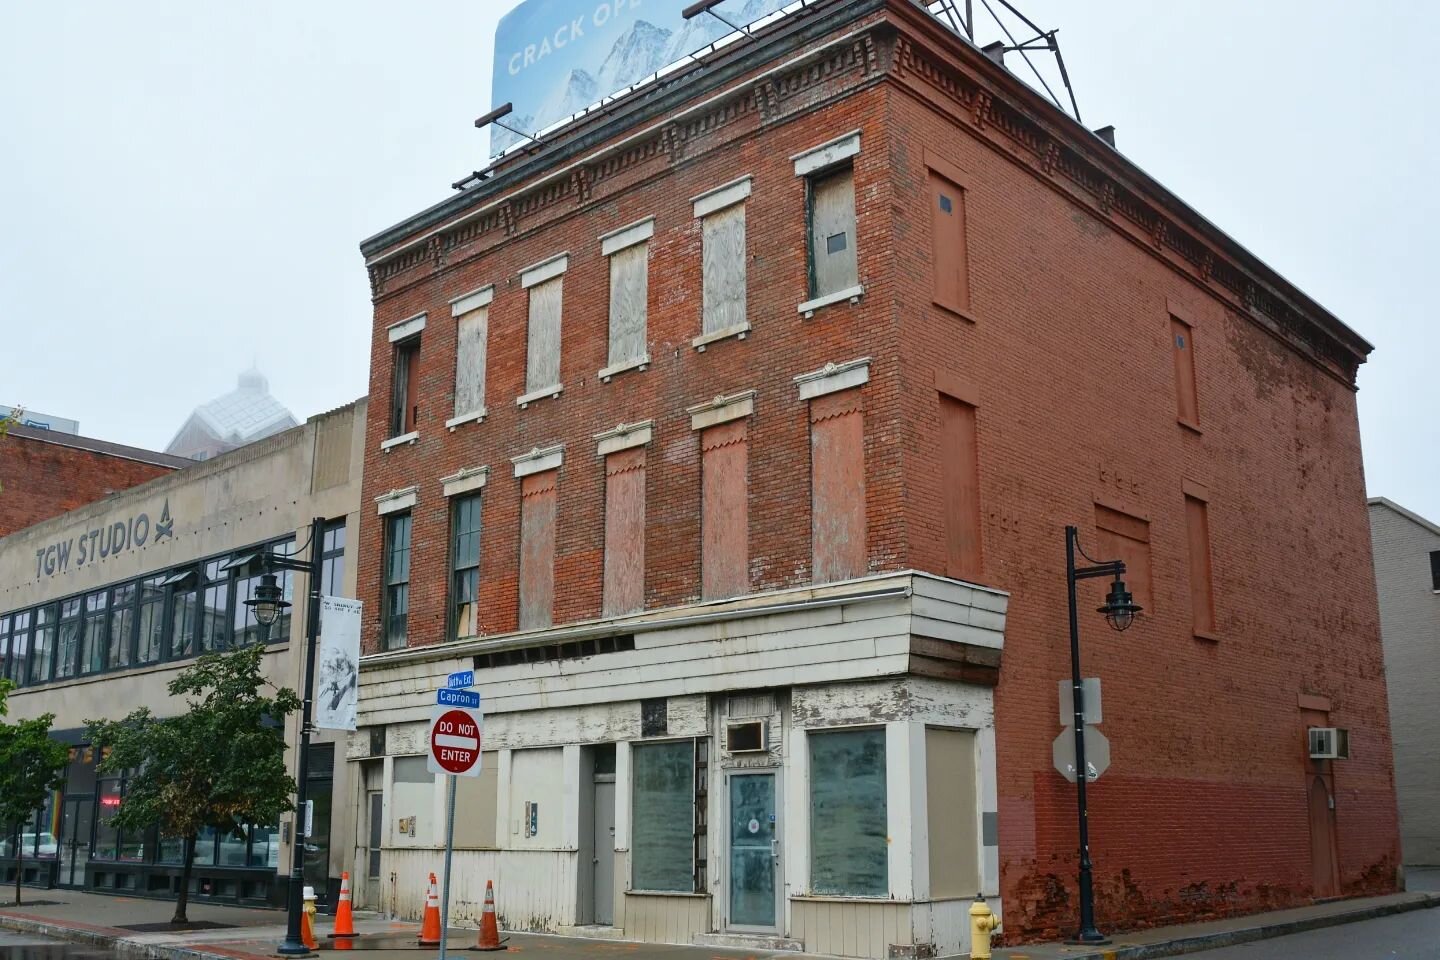 This building is a survivor, nearly the last of its kind in this portion of downtown Rochester. Last week, we and @tylerluceroroc finally crossed the finish line on getting it approved for listing on the National Register!

Built ca.1865, it original